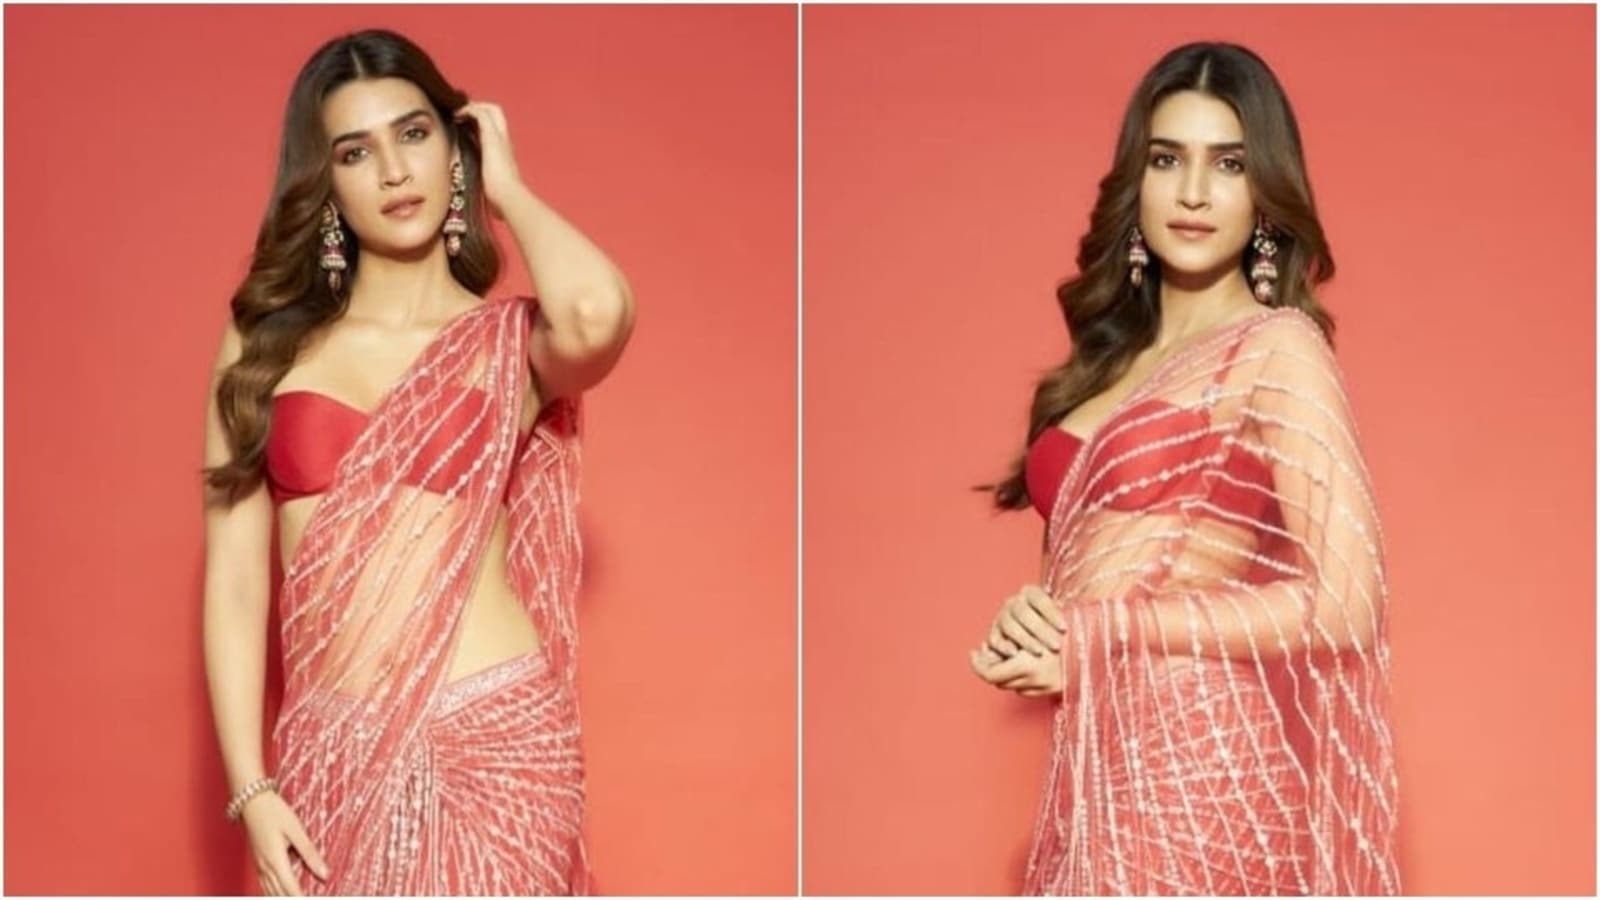 Kriti Sanon In Sheer Sequin Saree Makes A Case For Pairing Six Yards